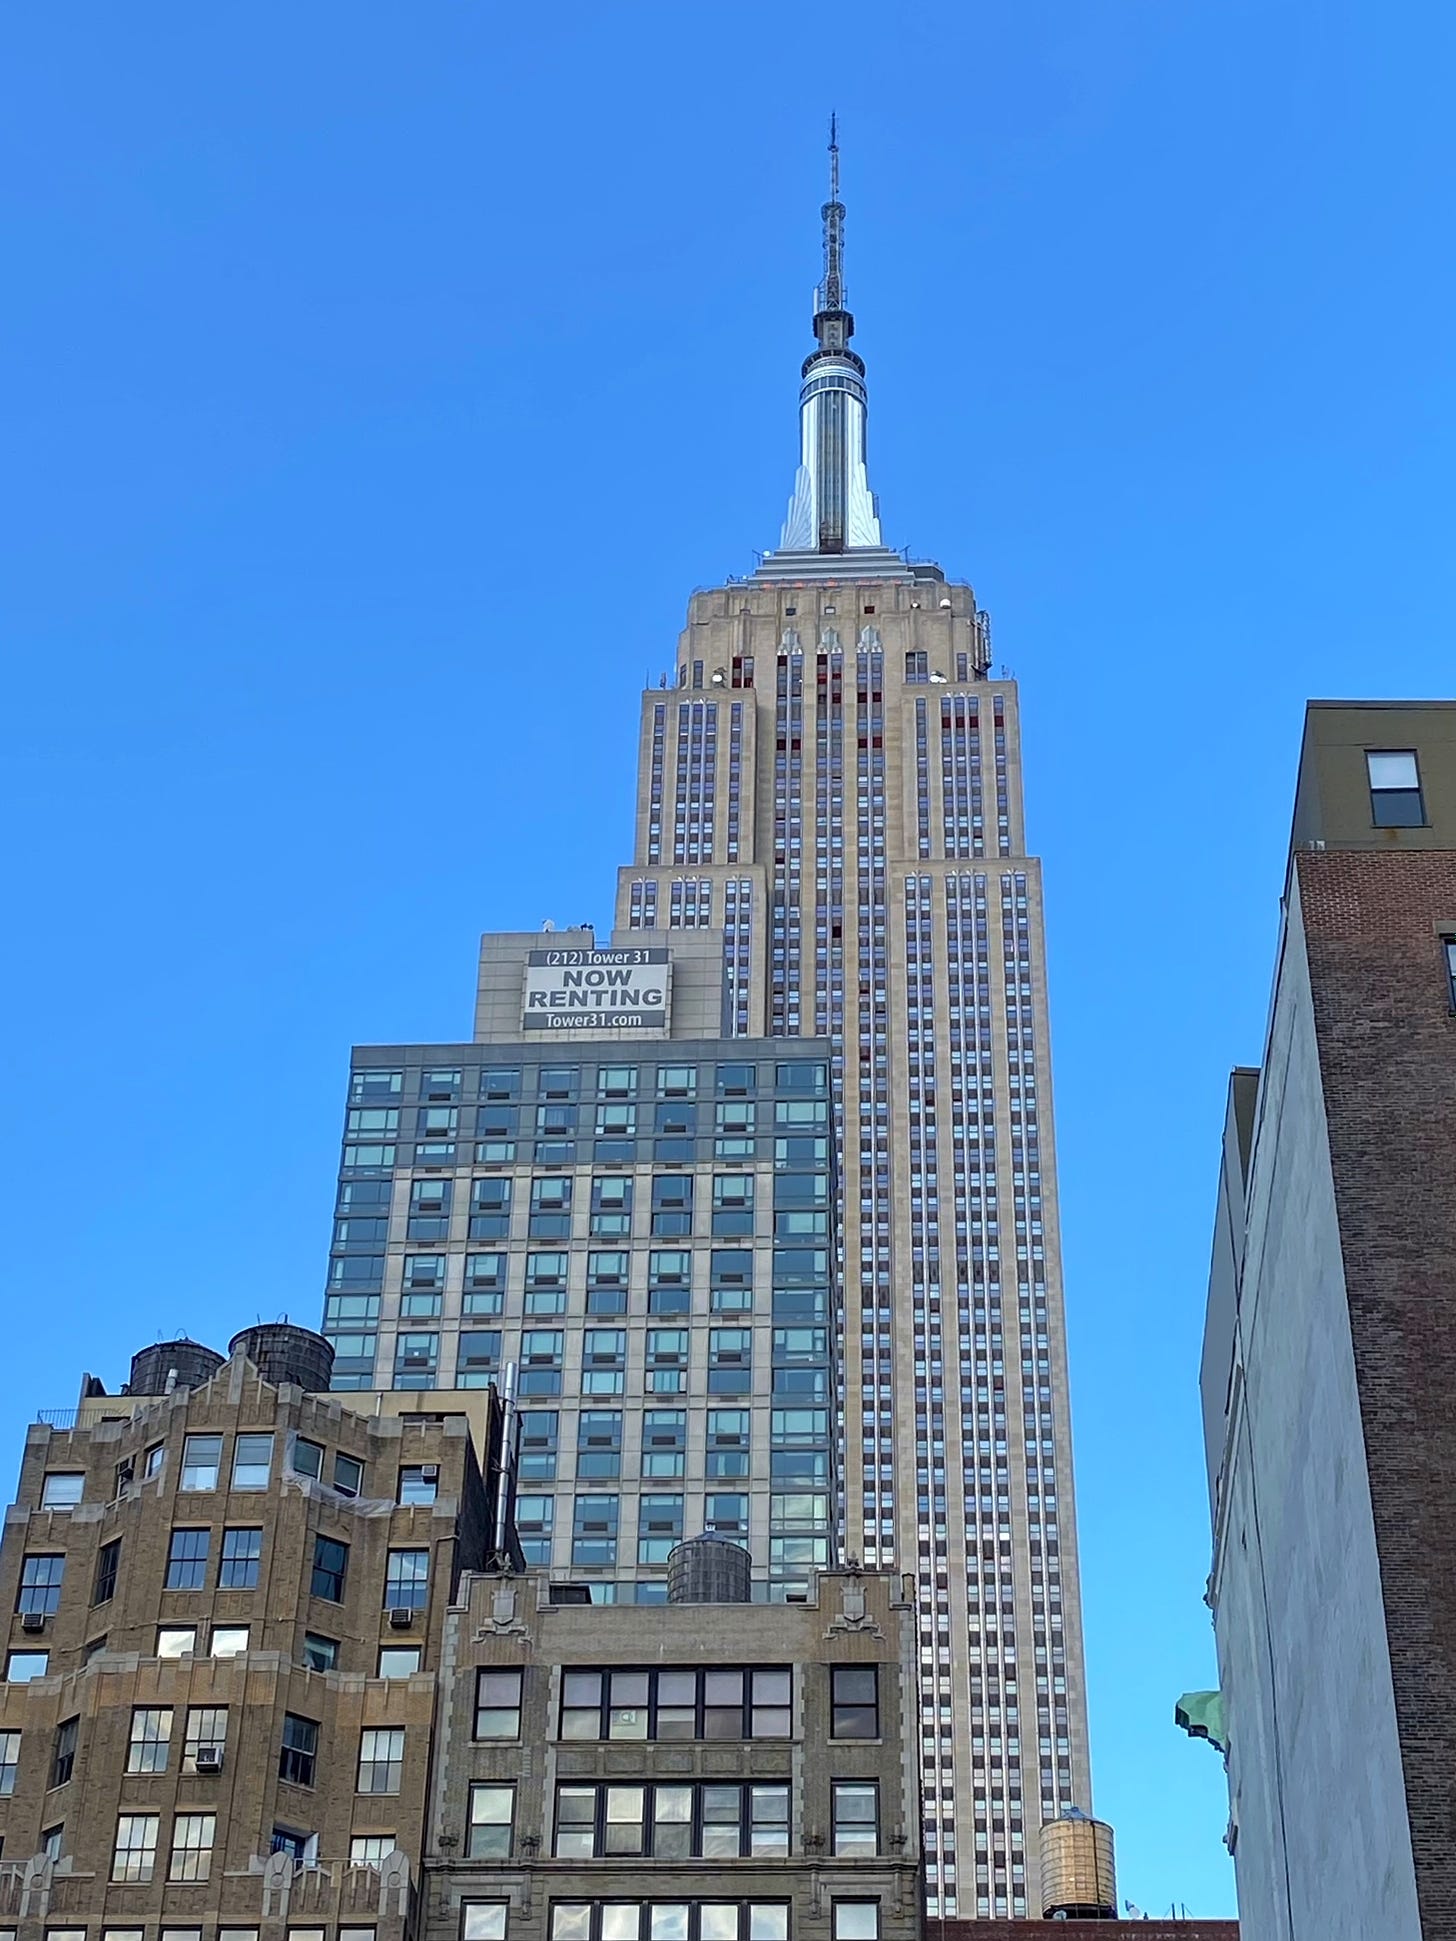 Four water towers on the roofs of the buildings south of the Empire State Building, standing in the rear of the shot.